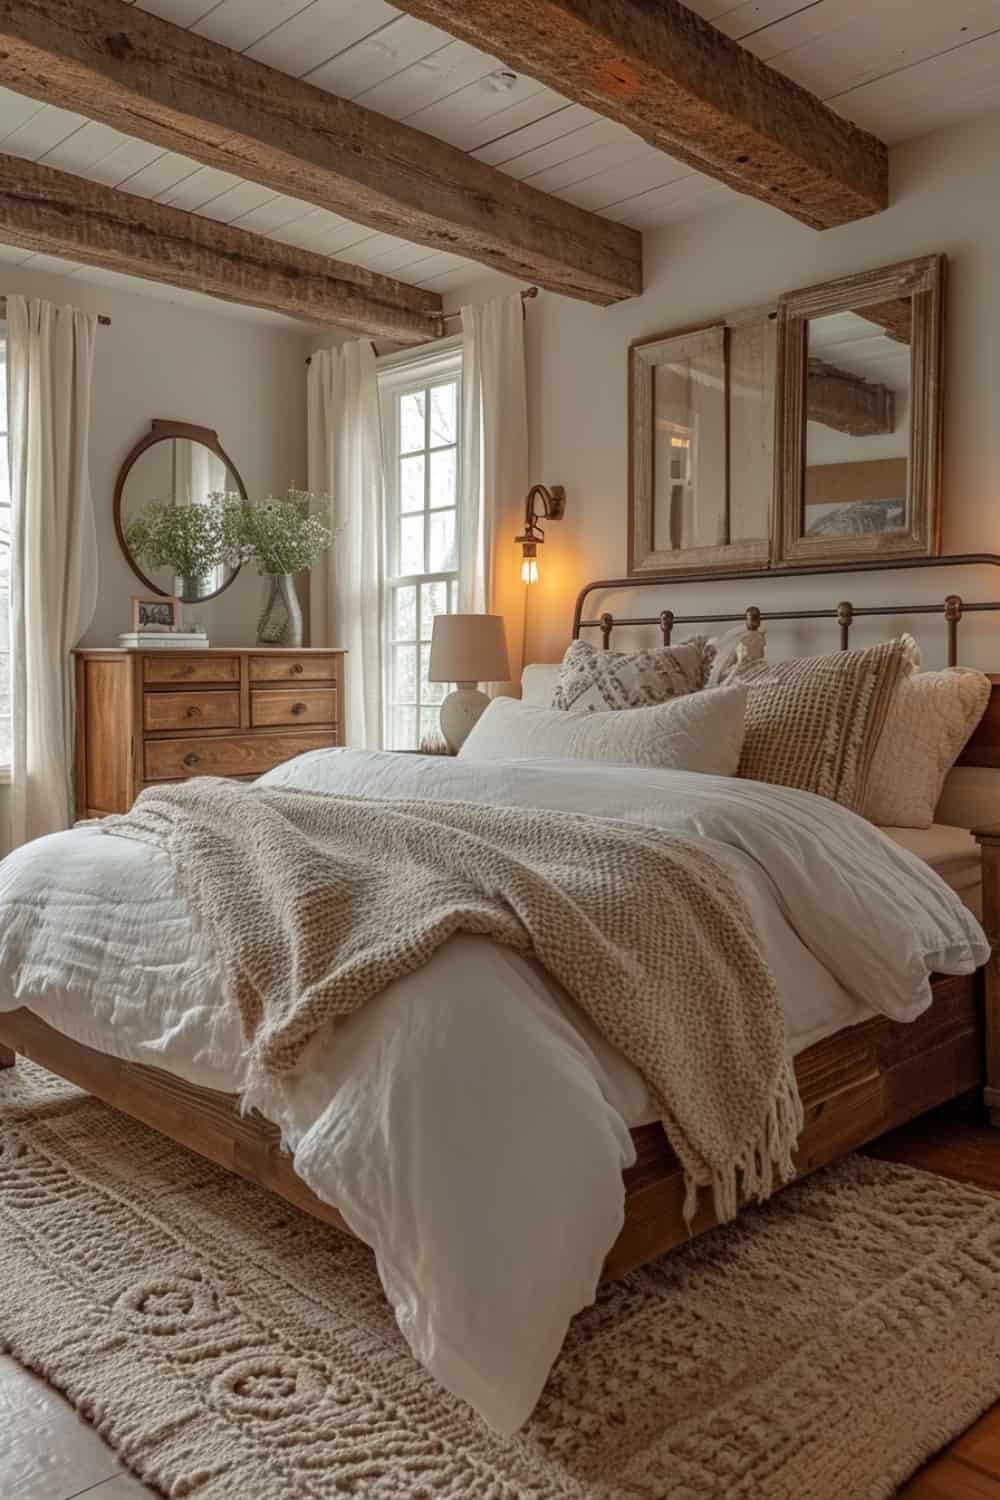 Farmhouse Bedroom Decor : Top Ideas for Farmhouse Bedroom Decor with Rustic Charm and Cozy Appeal